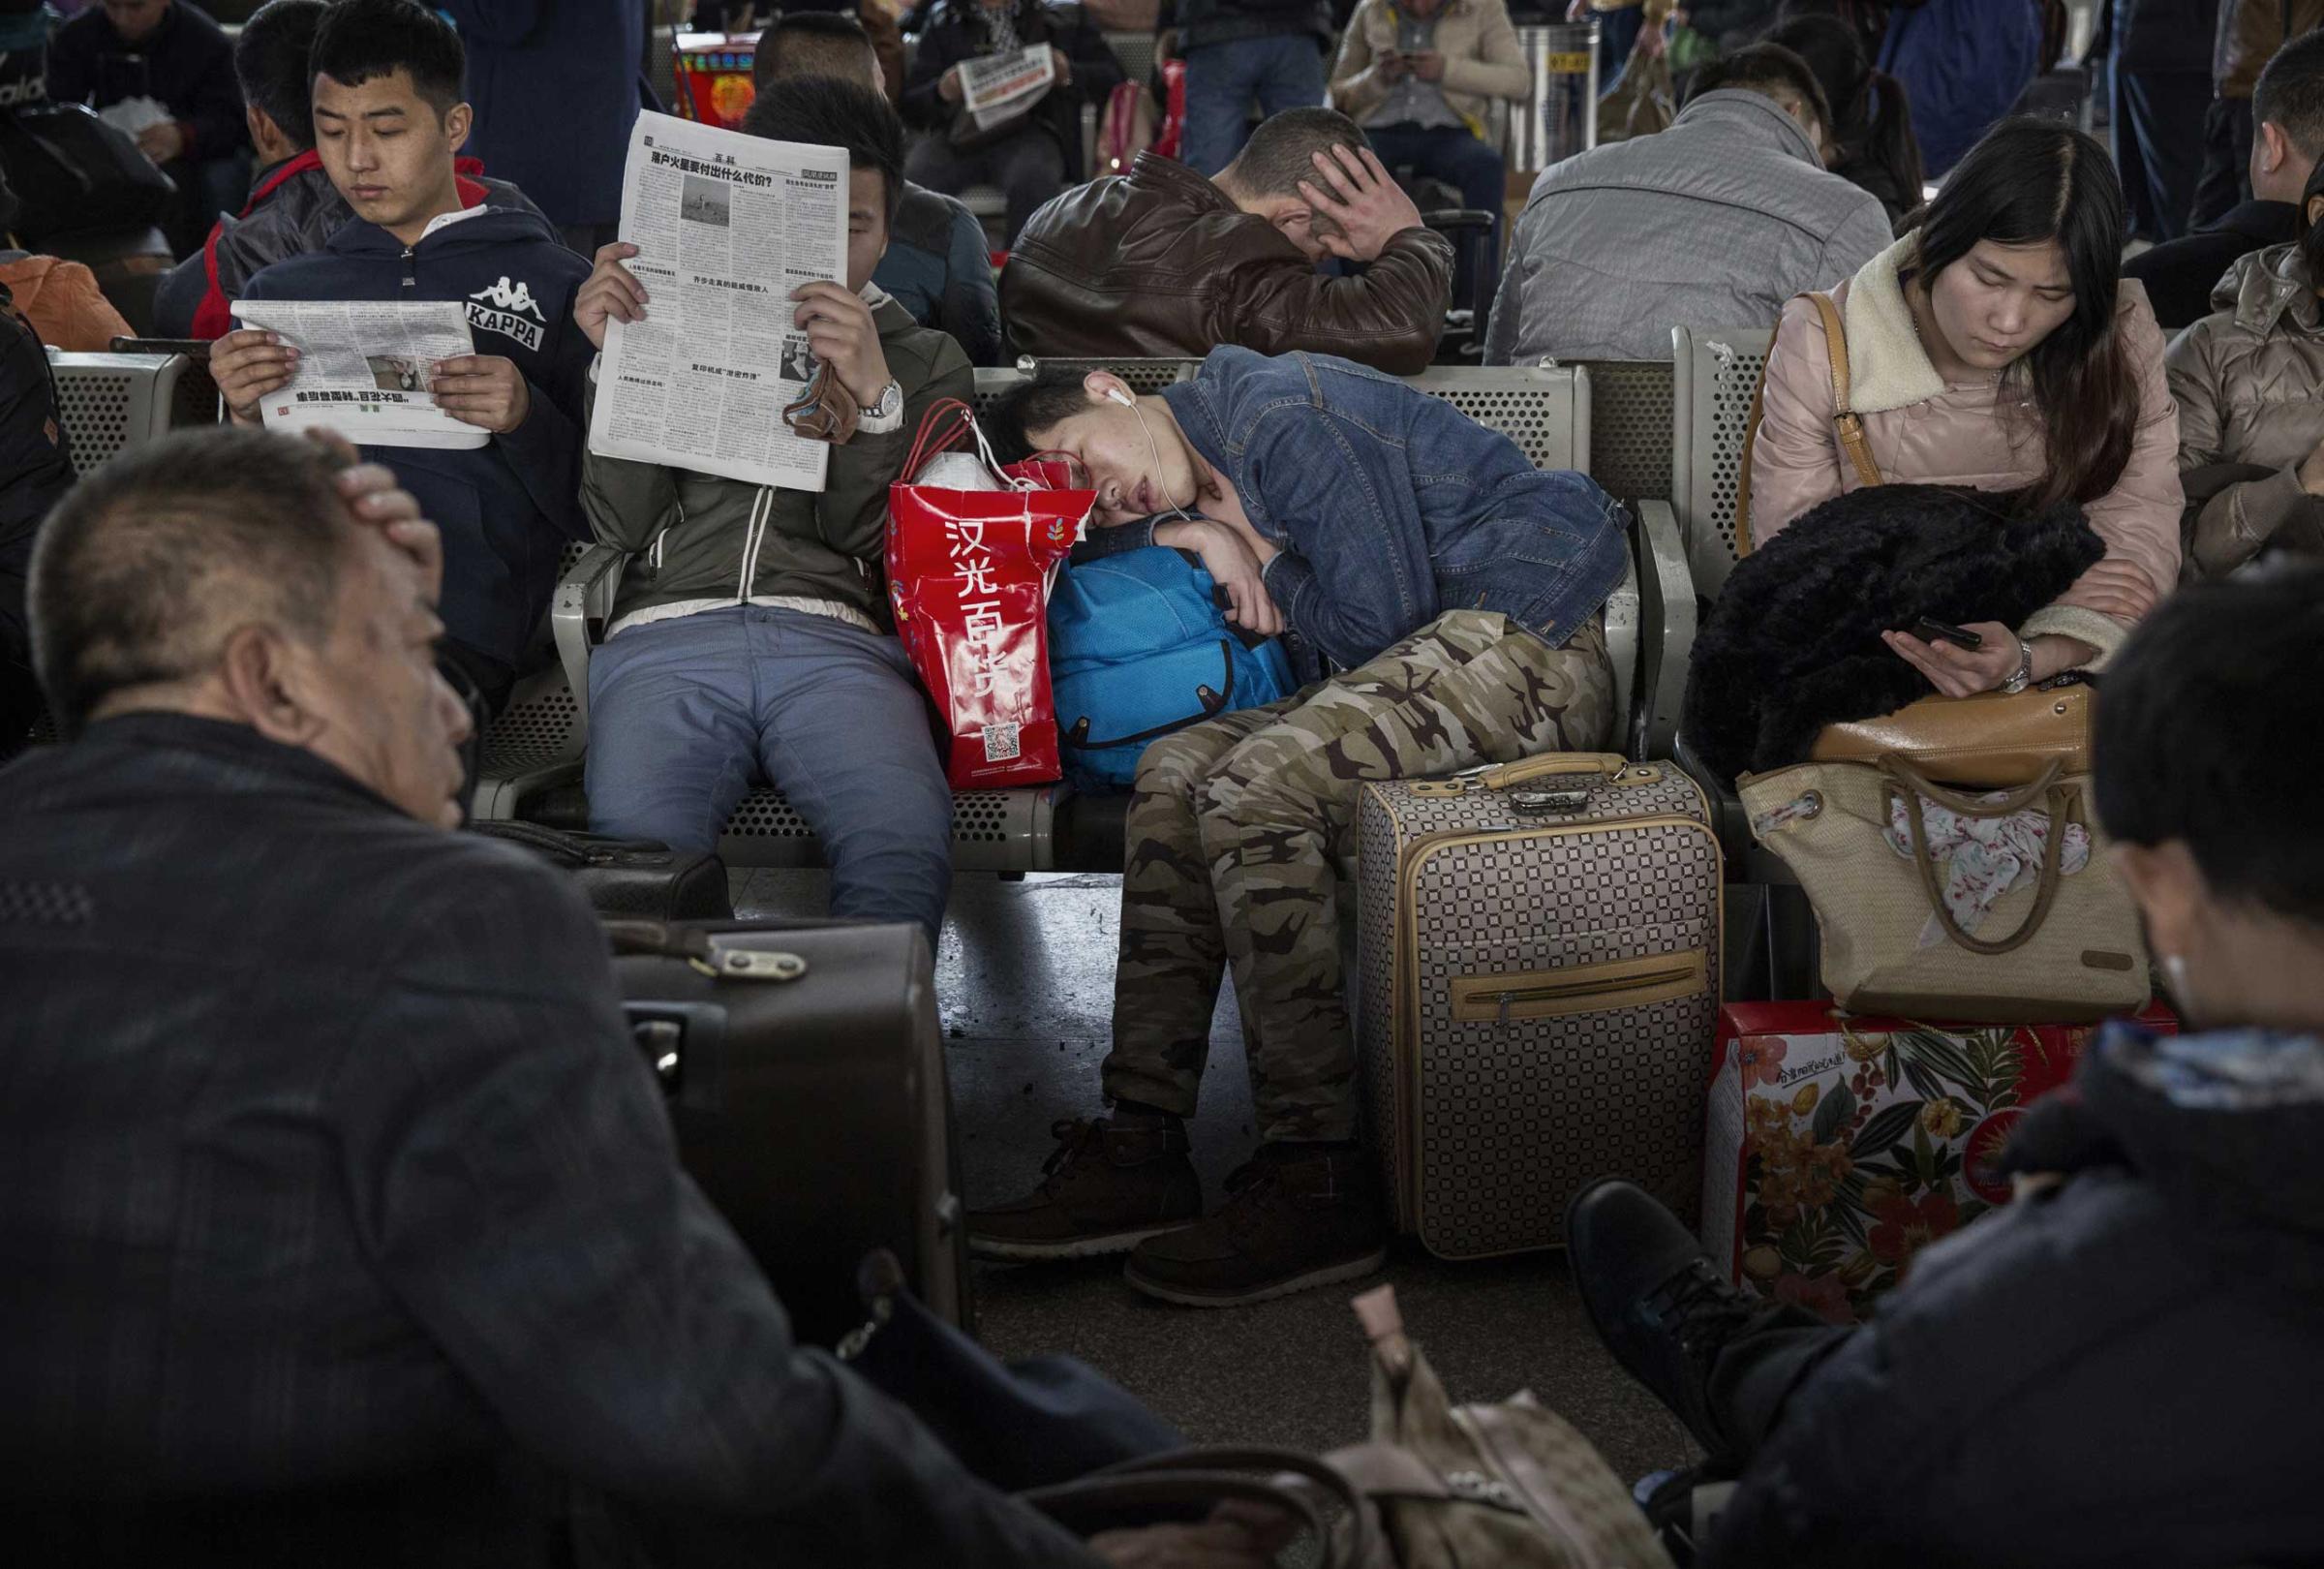 A traveler sleeps as others read and relax as they wait to leave for the Spring Festival at a local railway station on Feb. 17, 2015 in Beijing.